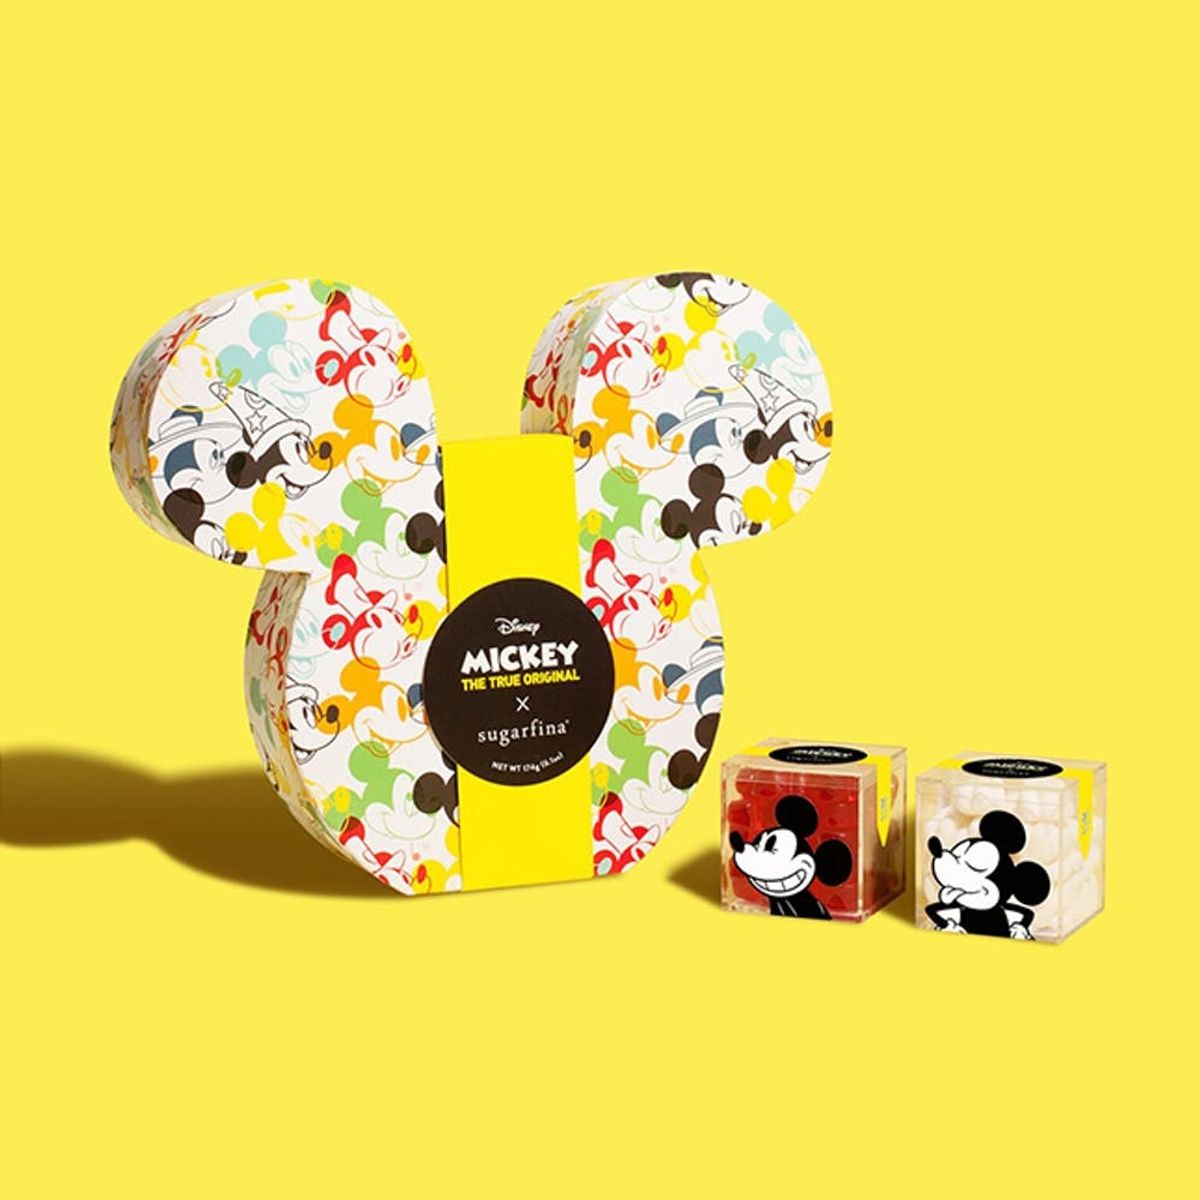 Sugarfina’s New Mickey Mouse Candy Collection Will Inspire You to Whistle Like Steamboat Willie